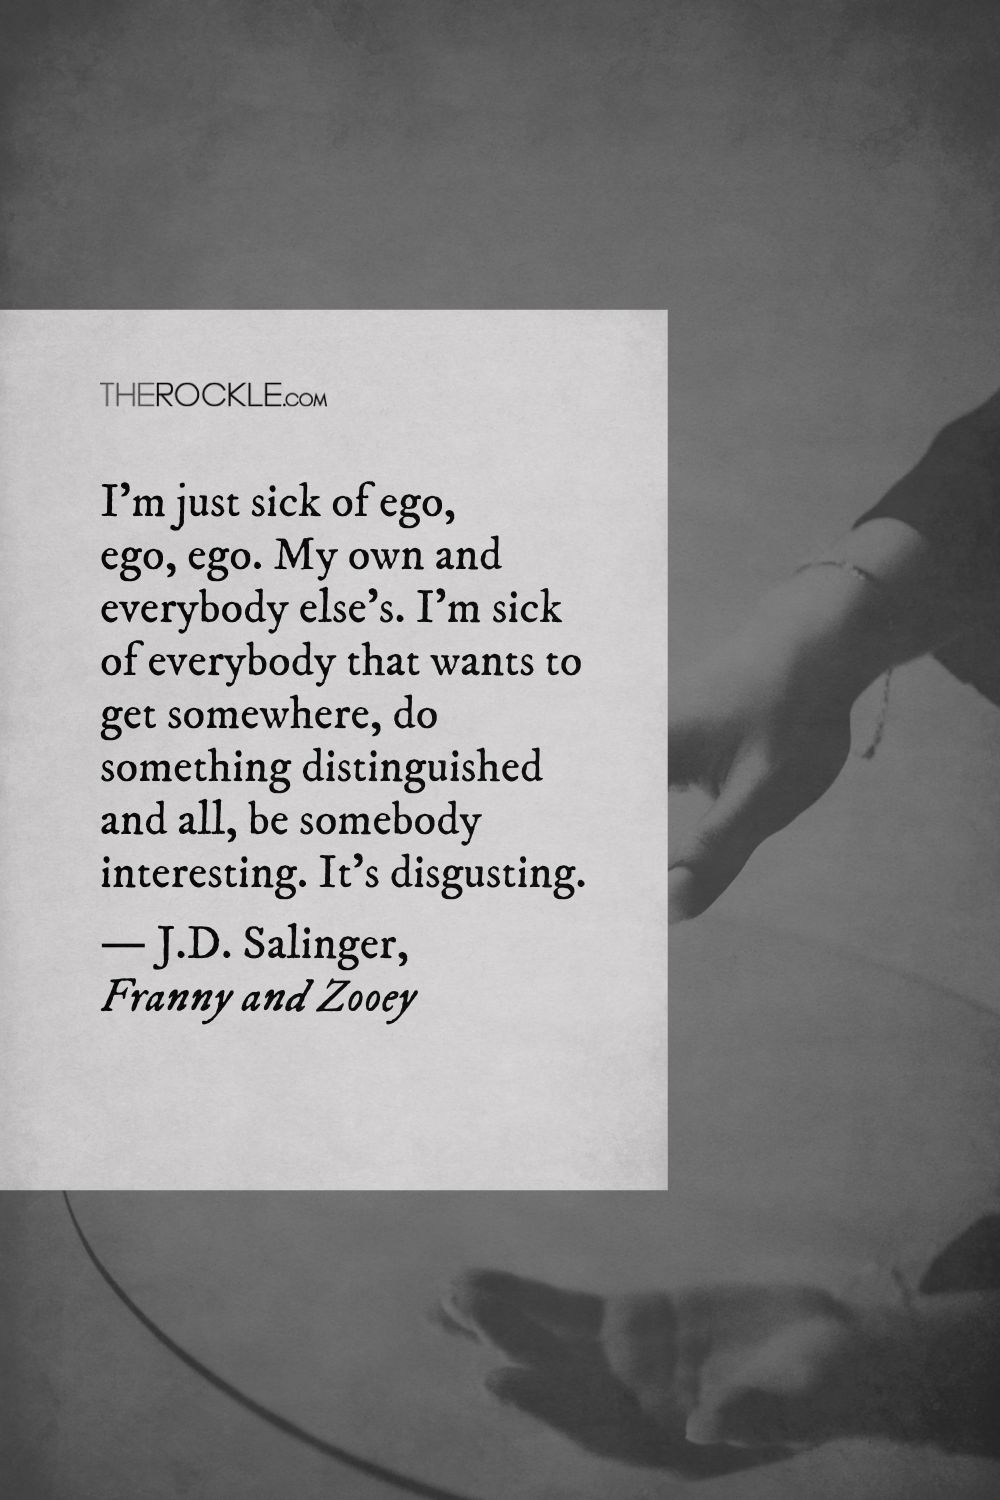 J.D. Salinger's quote about ego